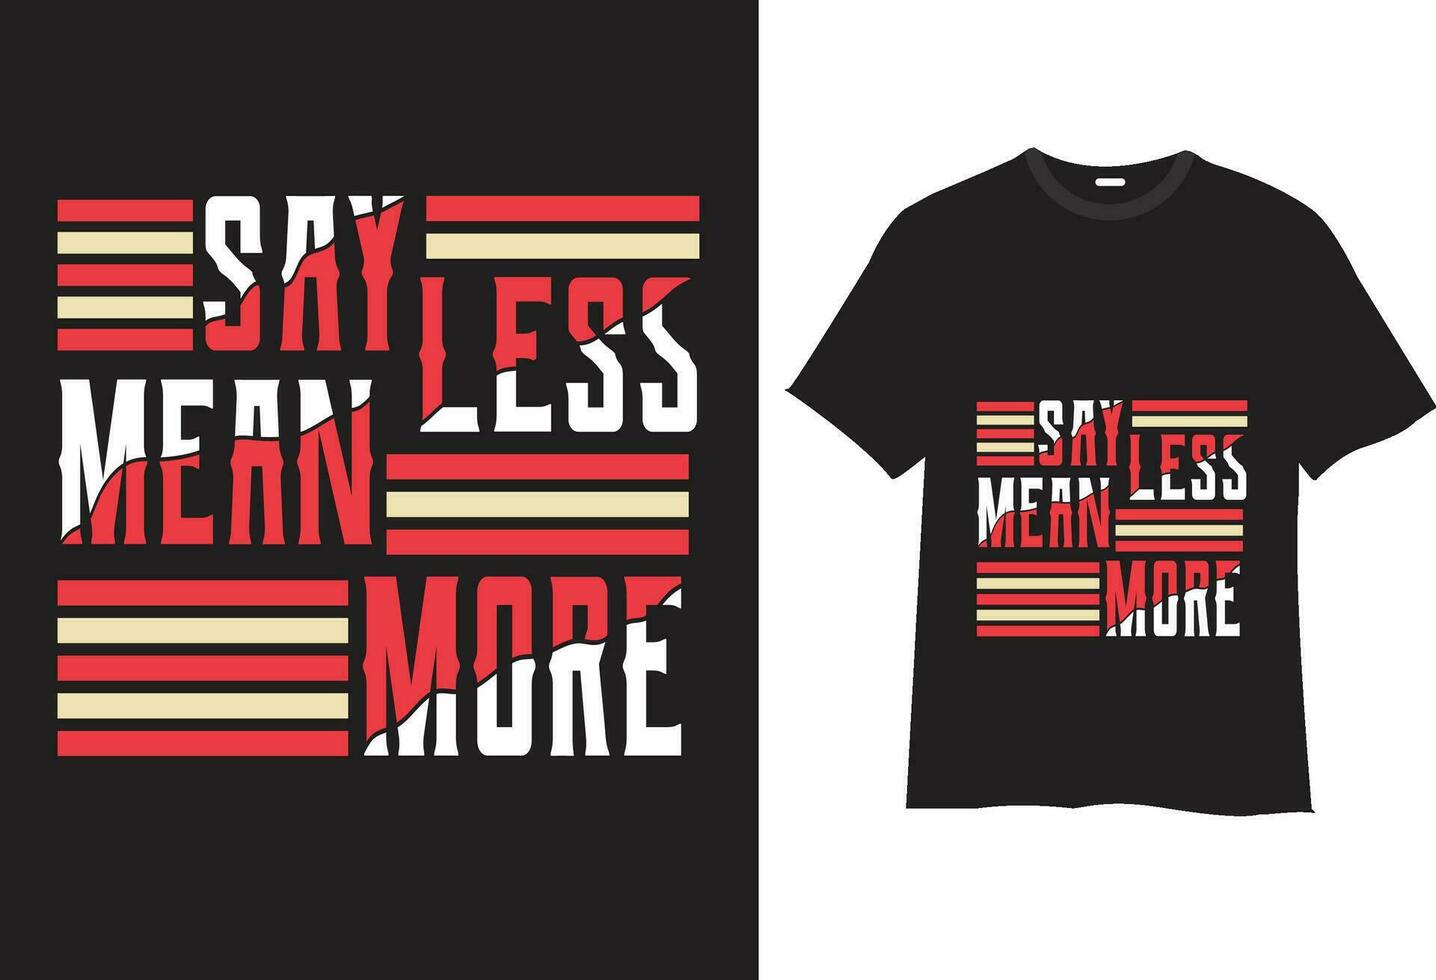 Say less mean more -T Shirt eye-catching Design Vector